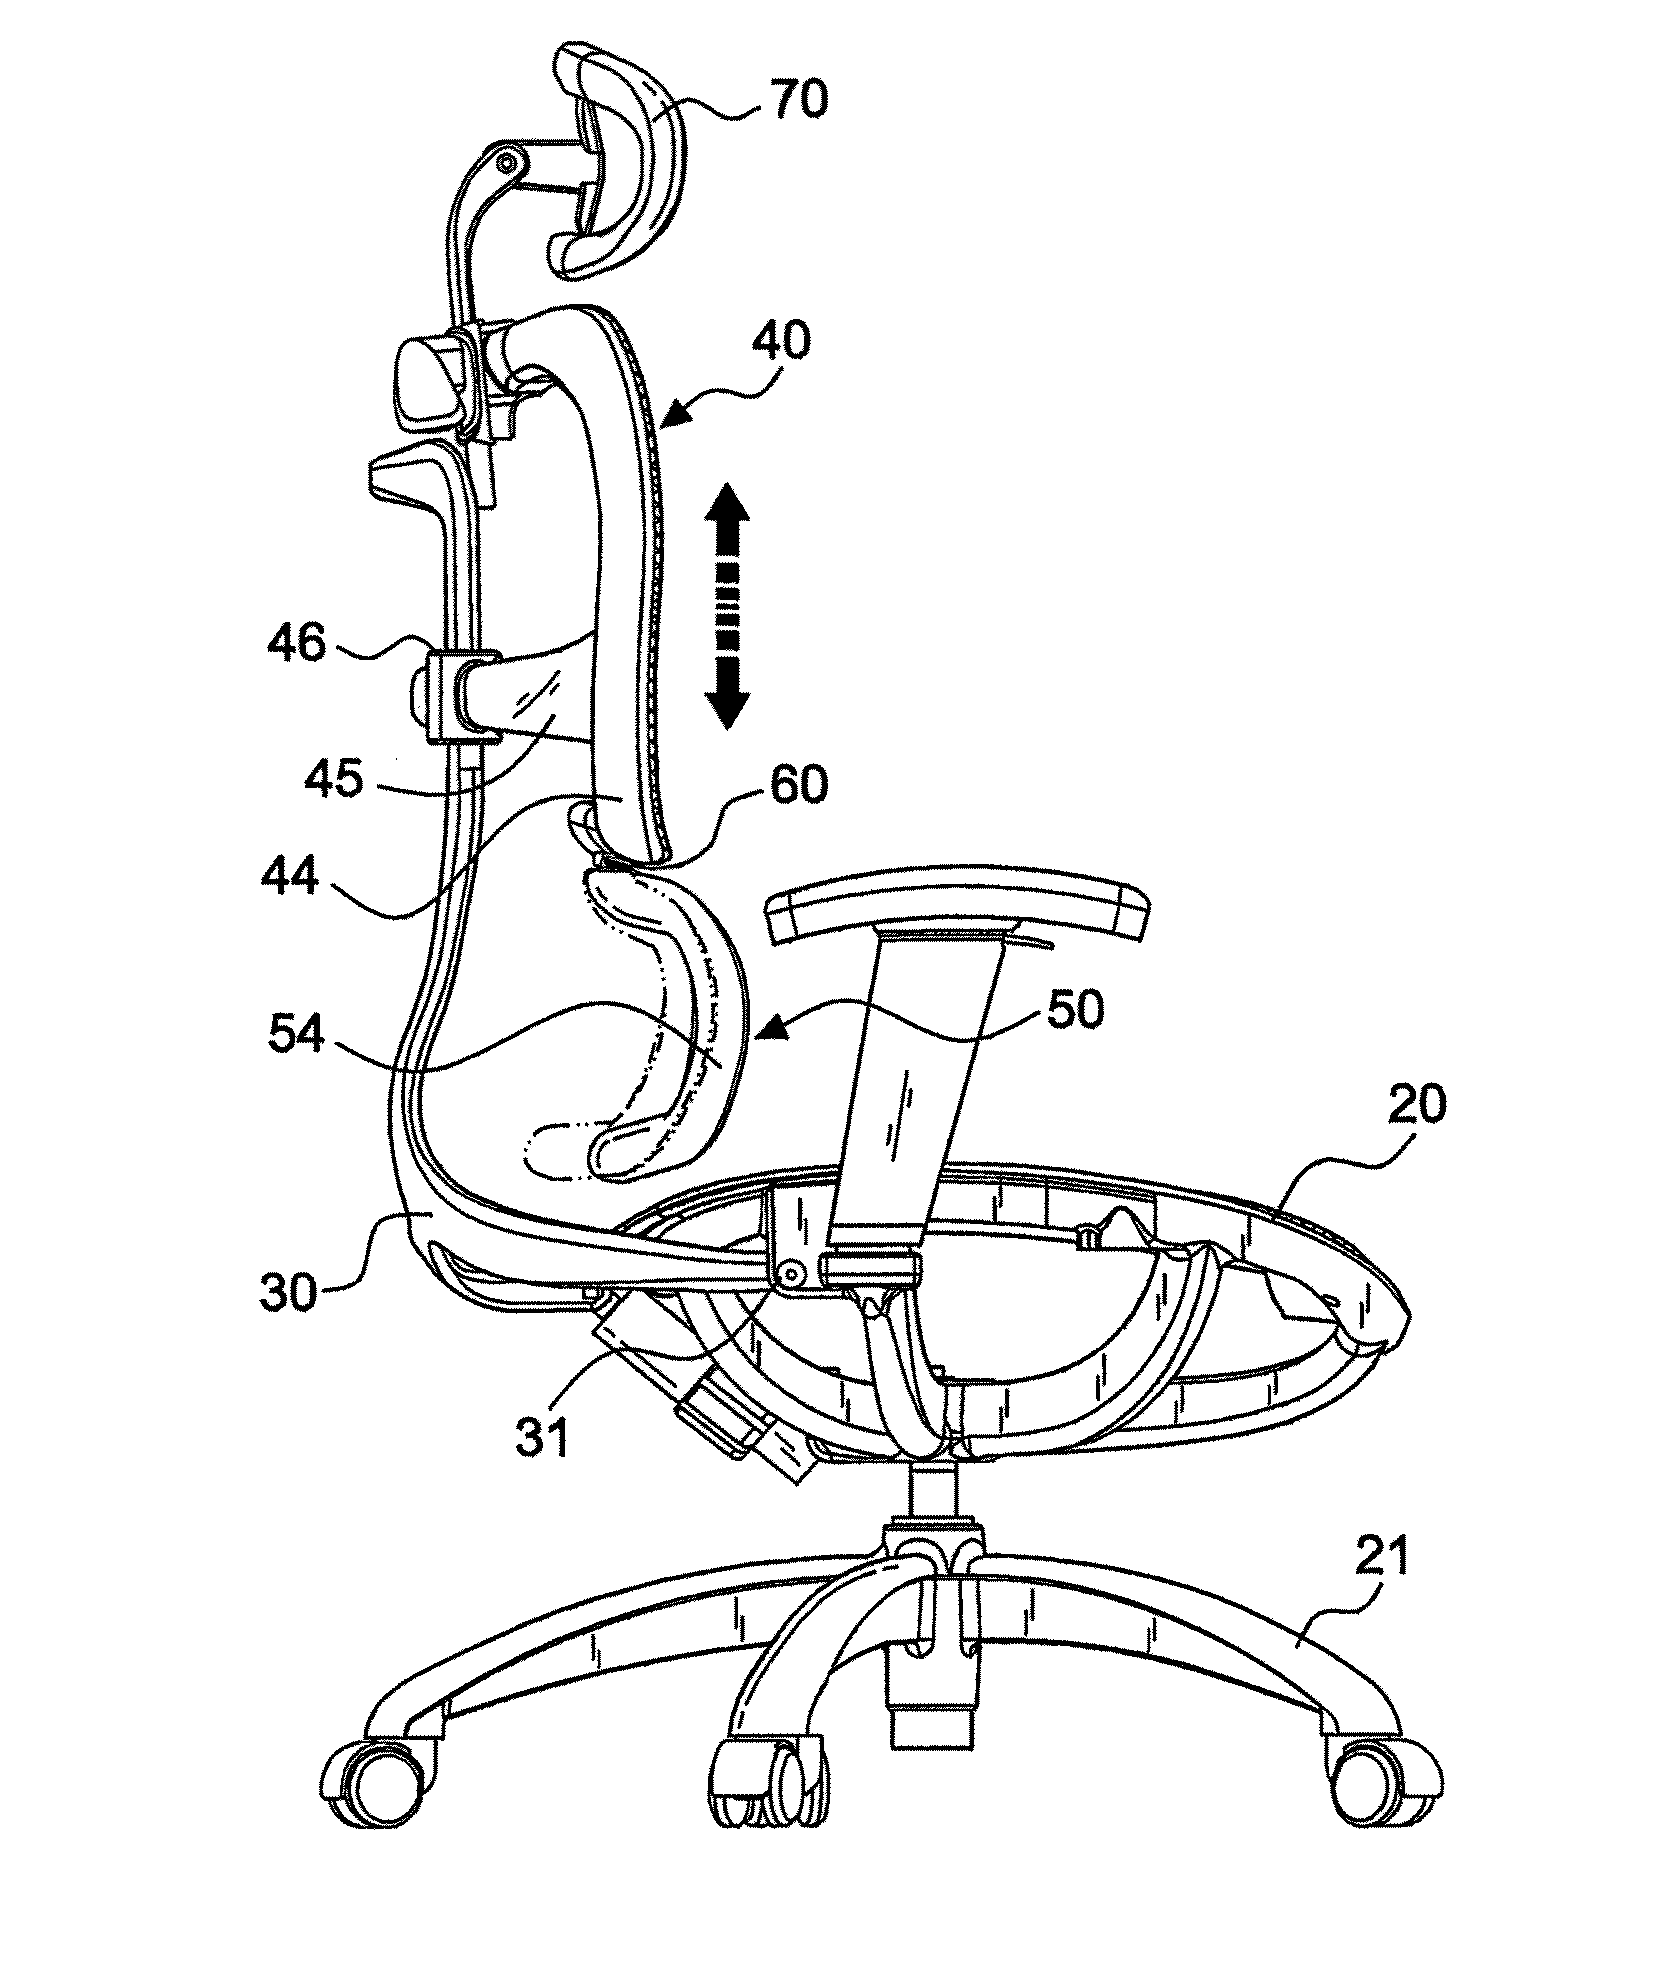 Automatic waistrest adjusting device for office chairs